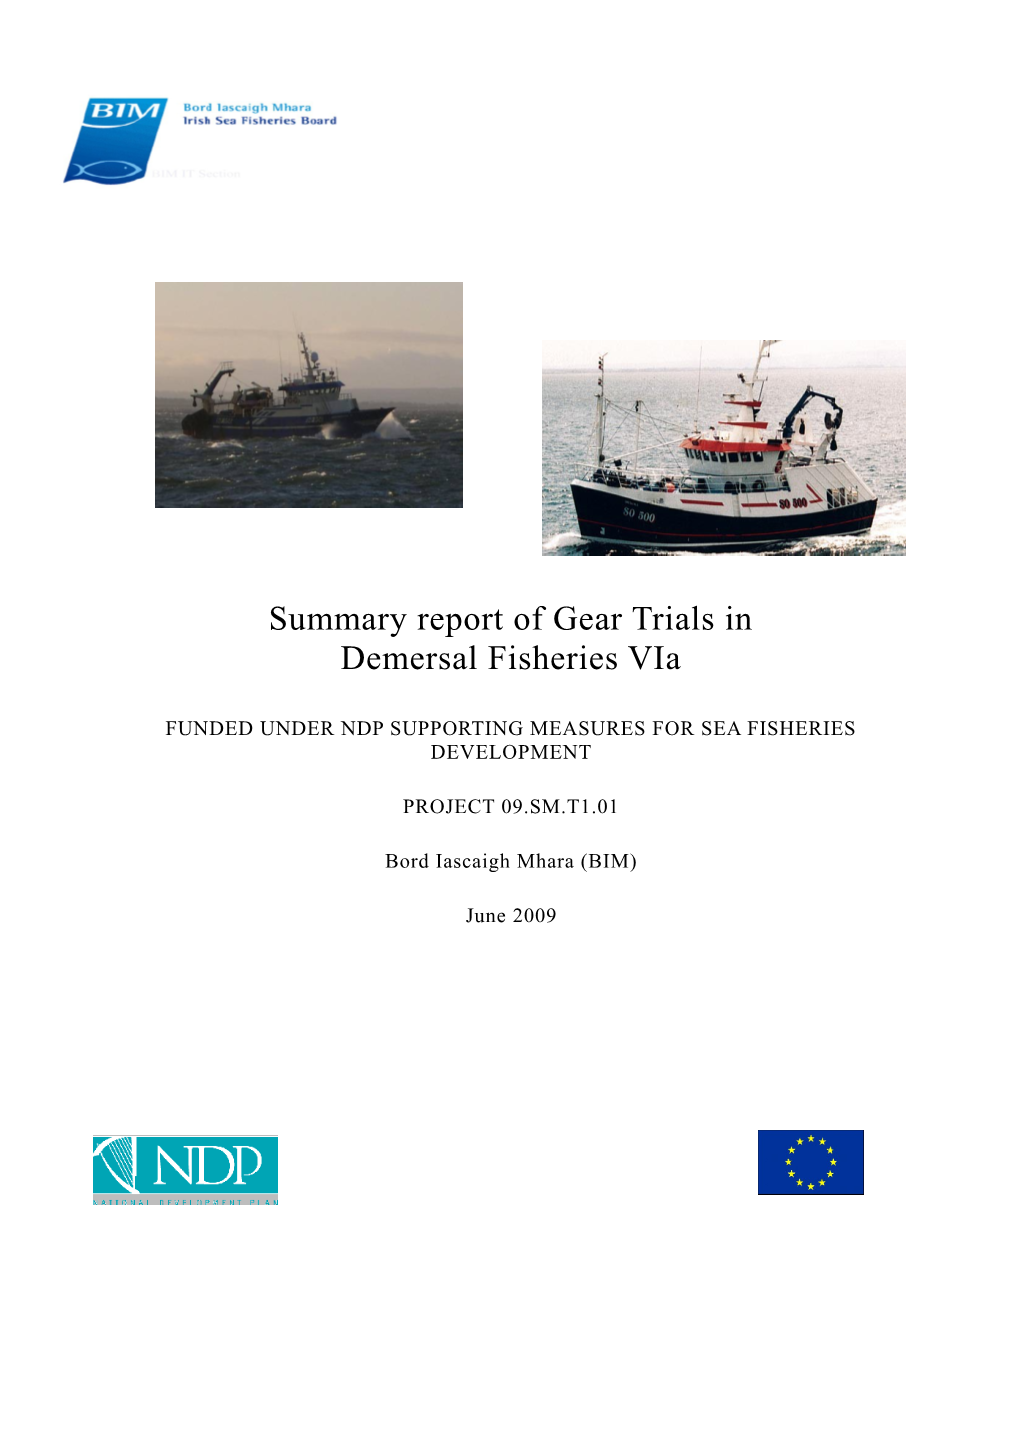 In 2008, a New EU Long-Term Plan for Cod Stocks Was Agreed, Which Introduced Kw Day Allocations